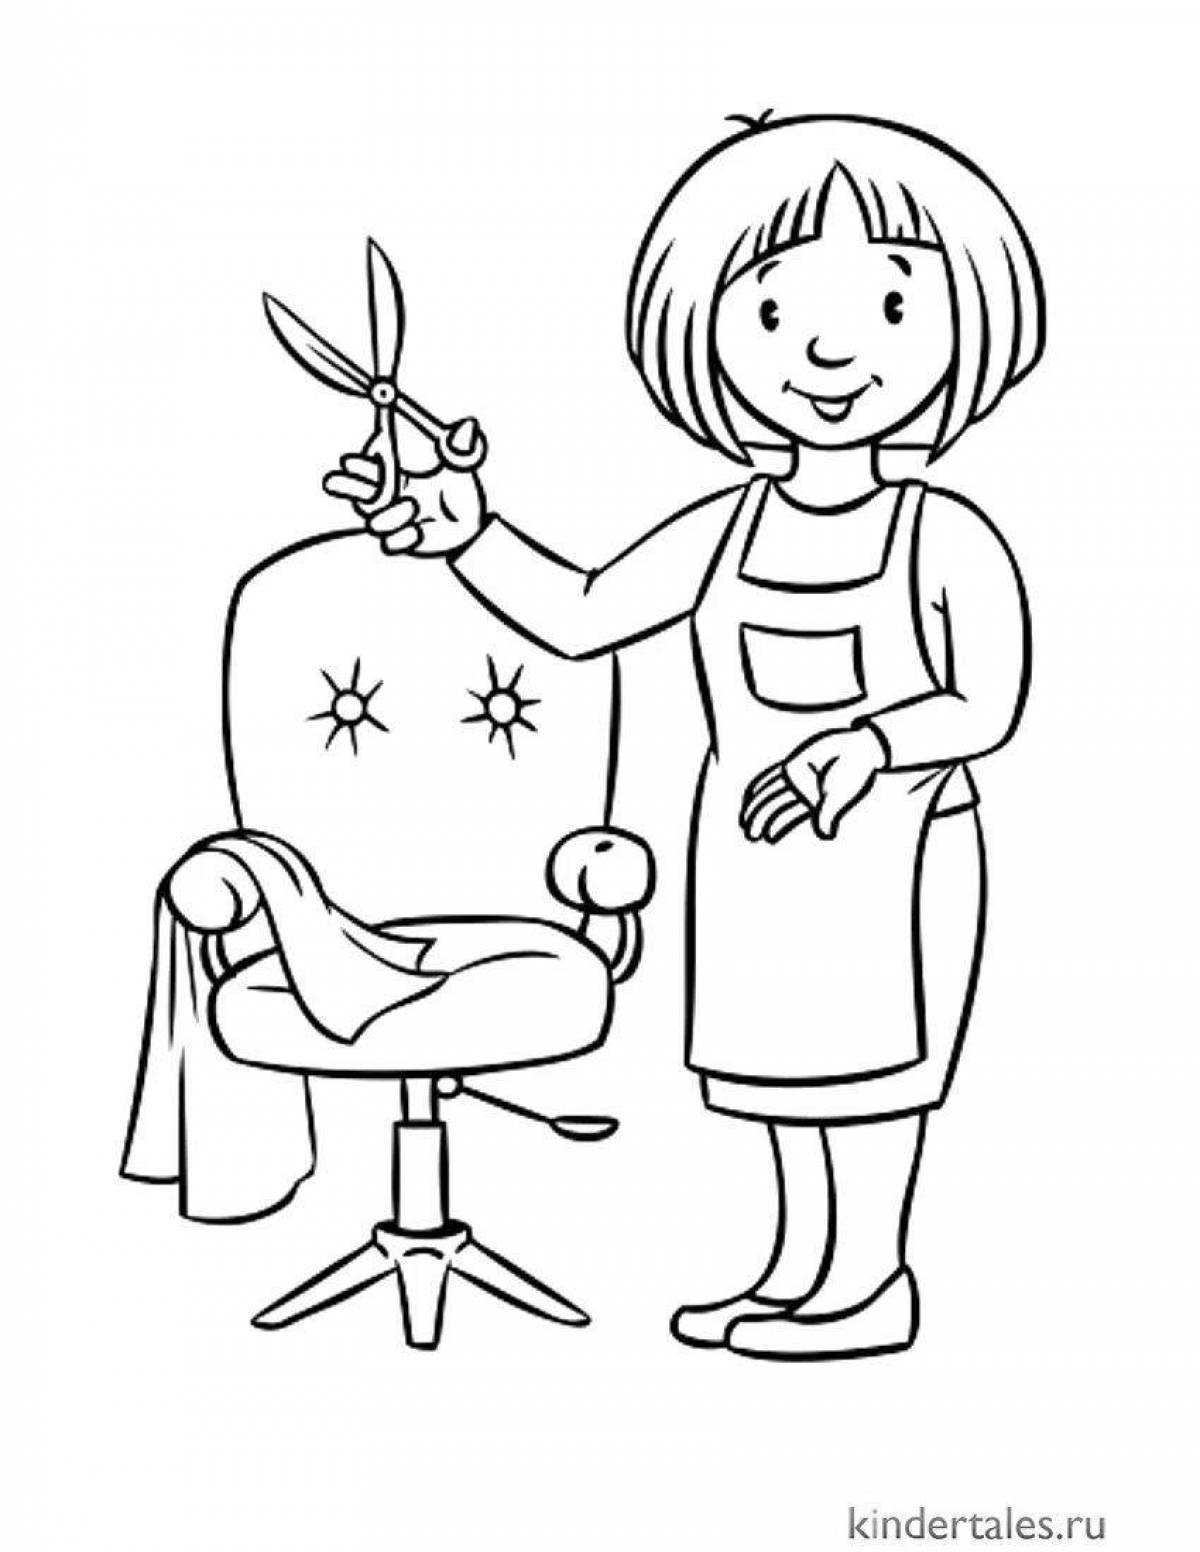 Creative hairdressing coloring book for kids